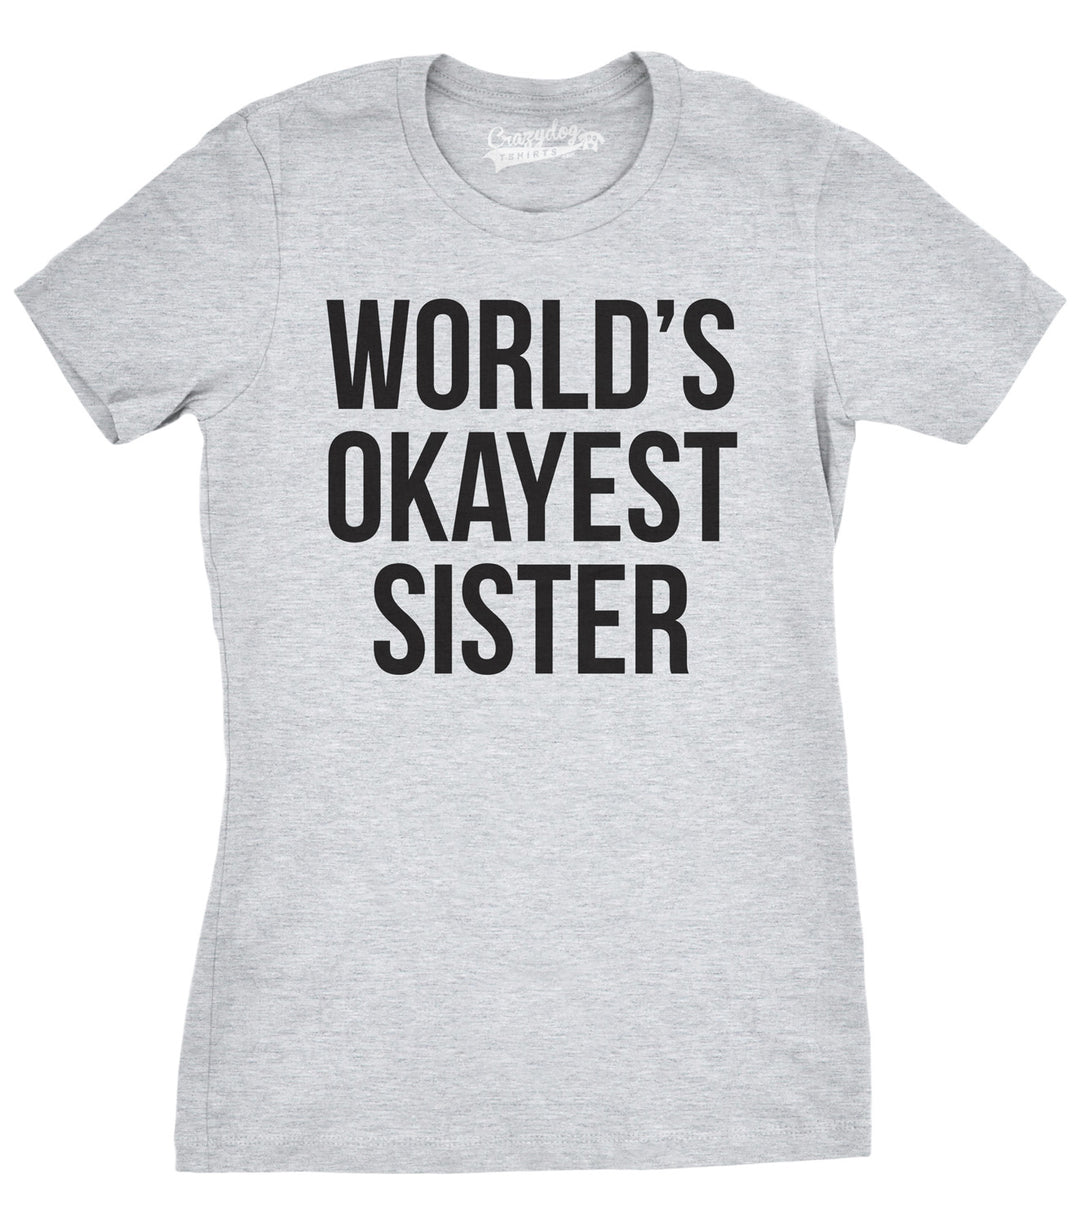 Funny Light Heather Grey World's Okayest Sister Womens T Shirt Nerdy Okayest Sister Sarcastic Tee